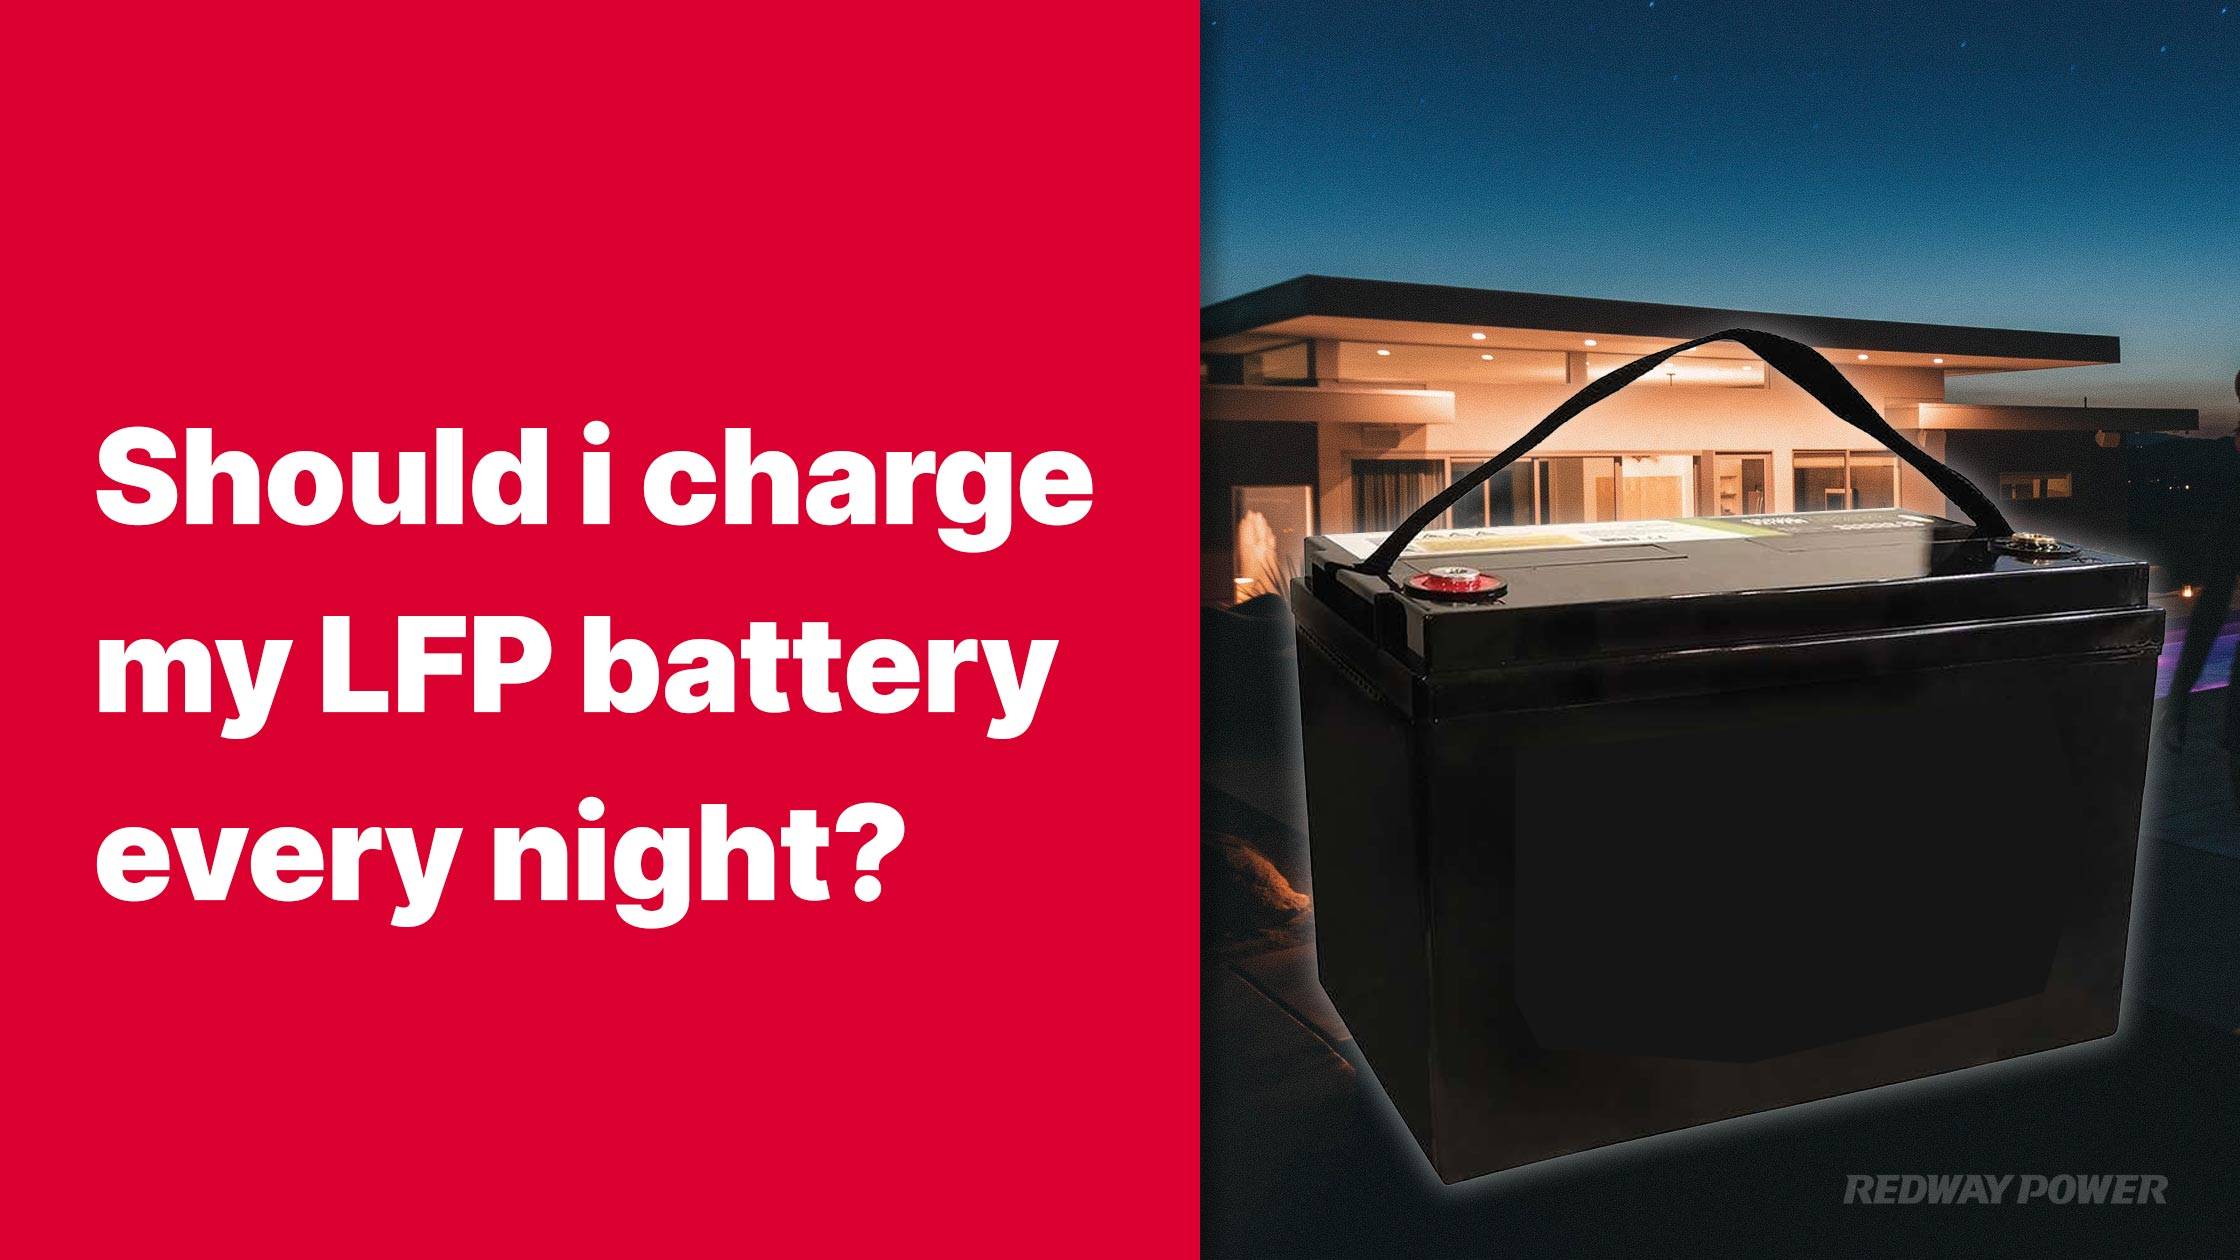 Should I charge my LFP battery every night?